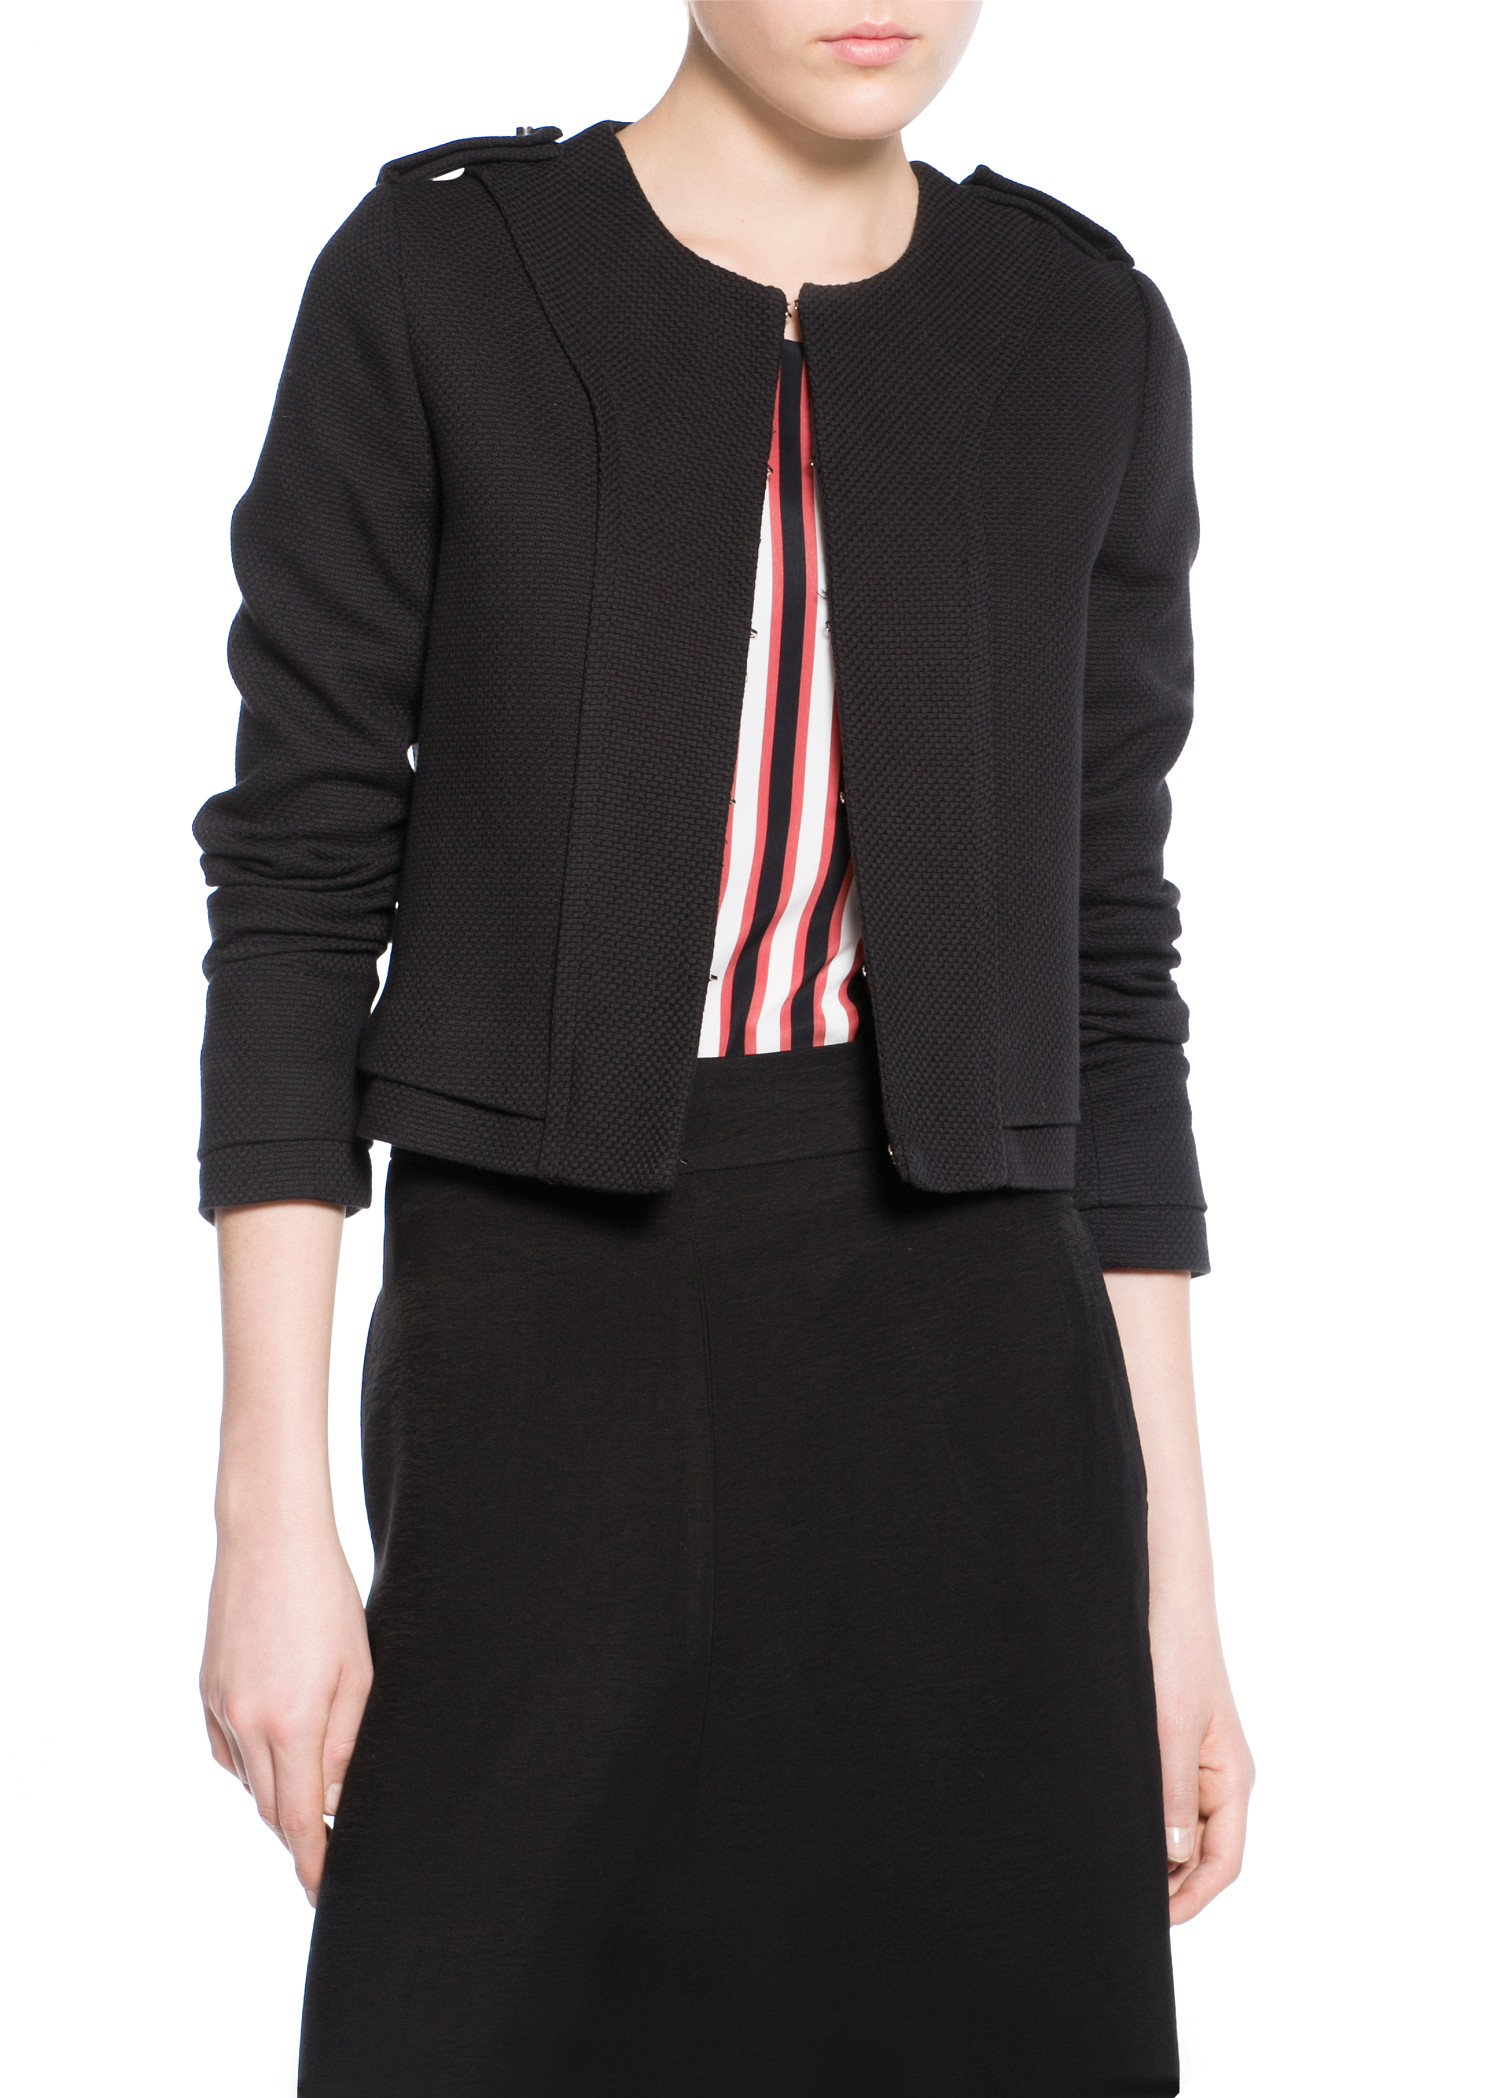 Lyst - Mango Textured Cropped Jacket in Black